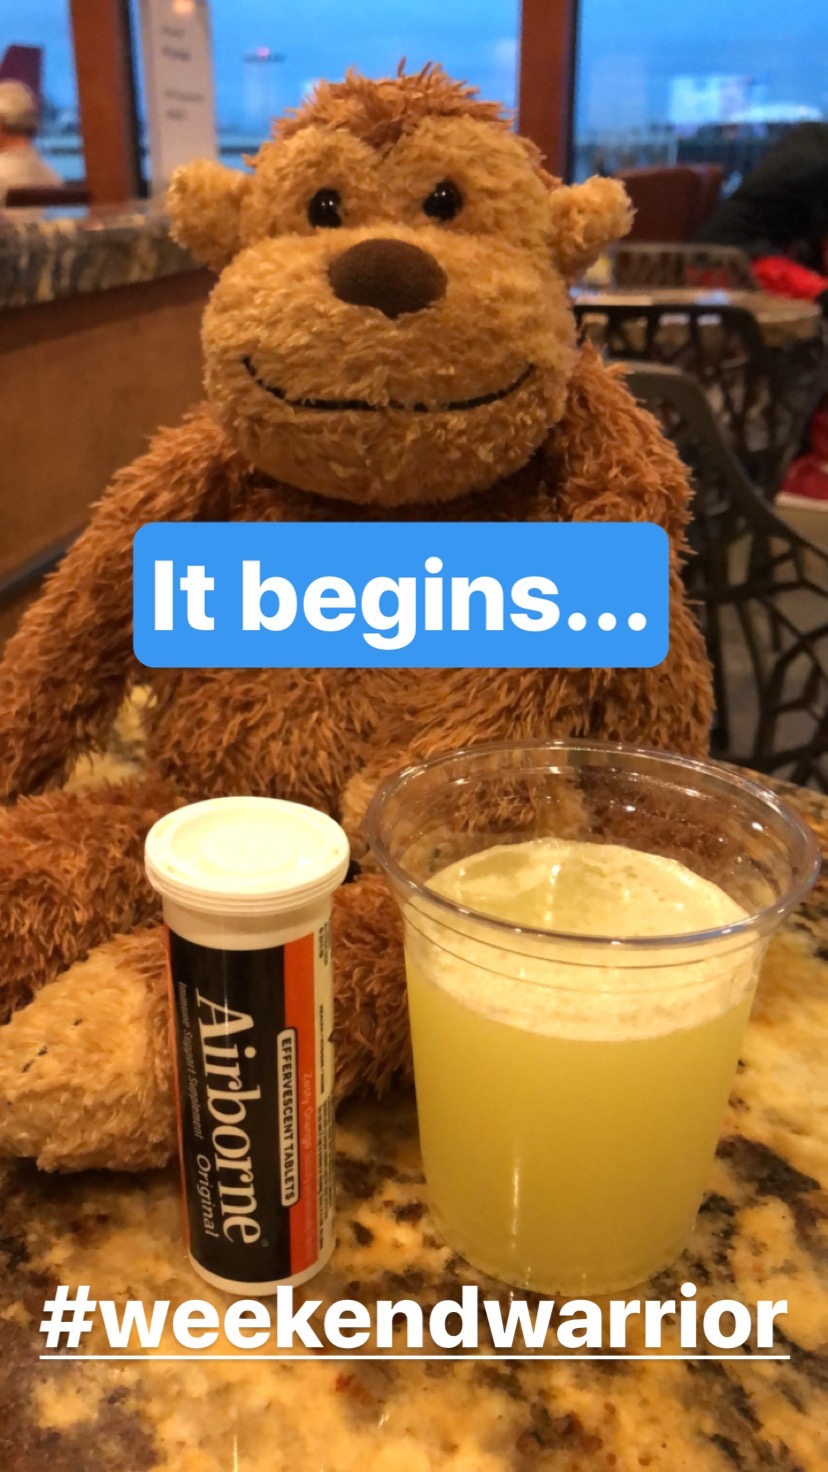 a stuffed animal next to a drink